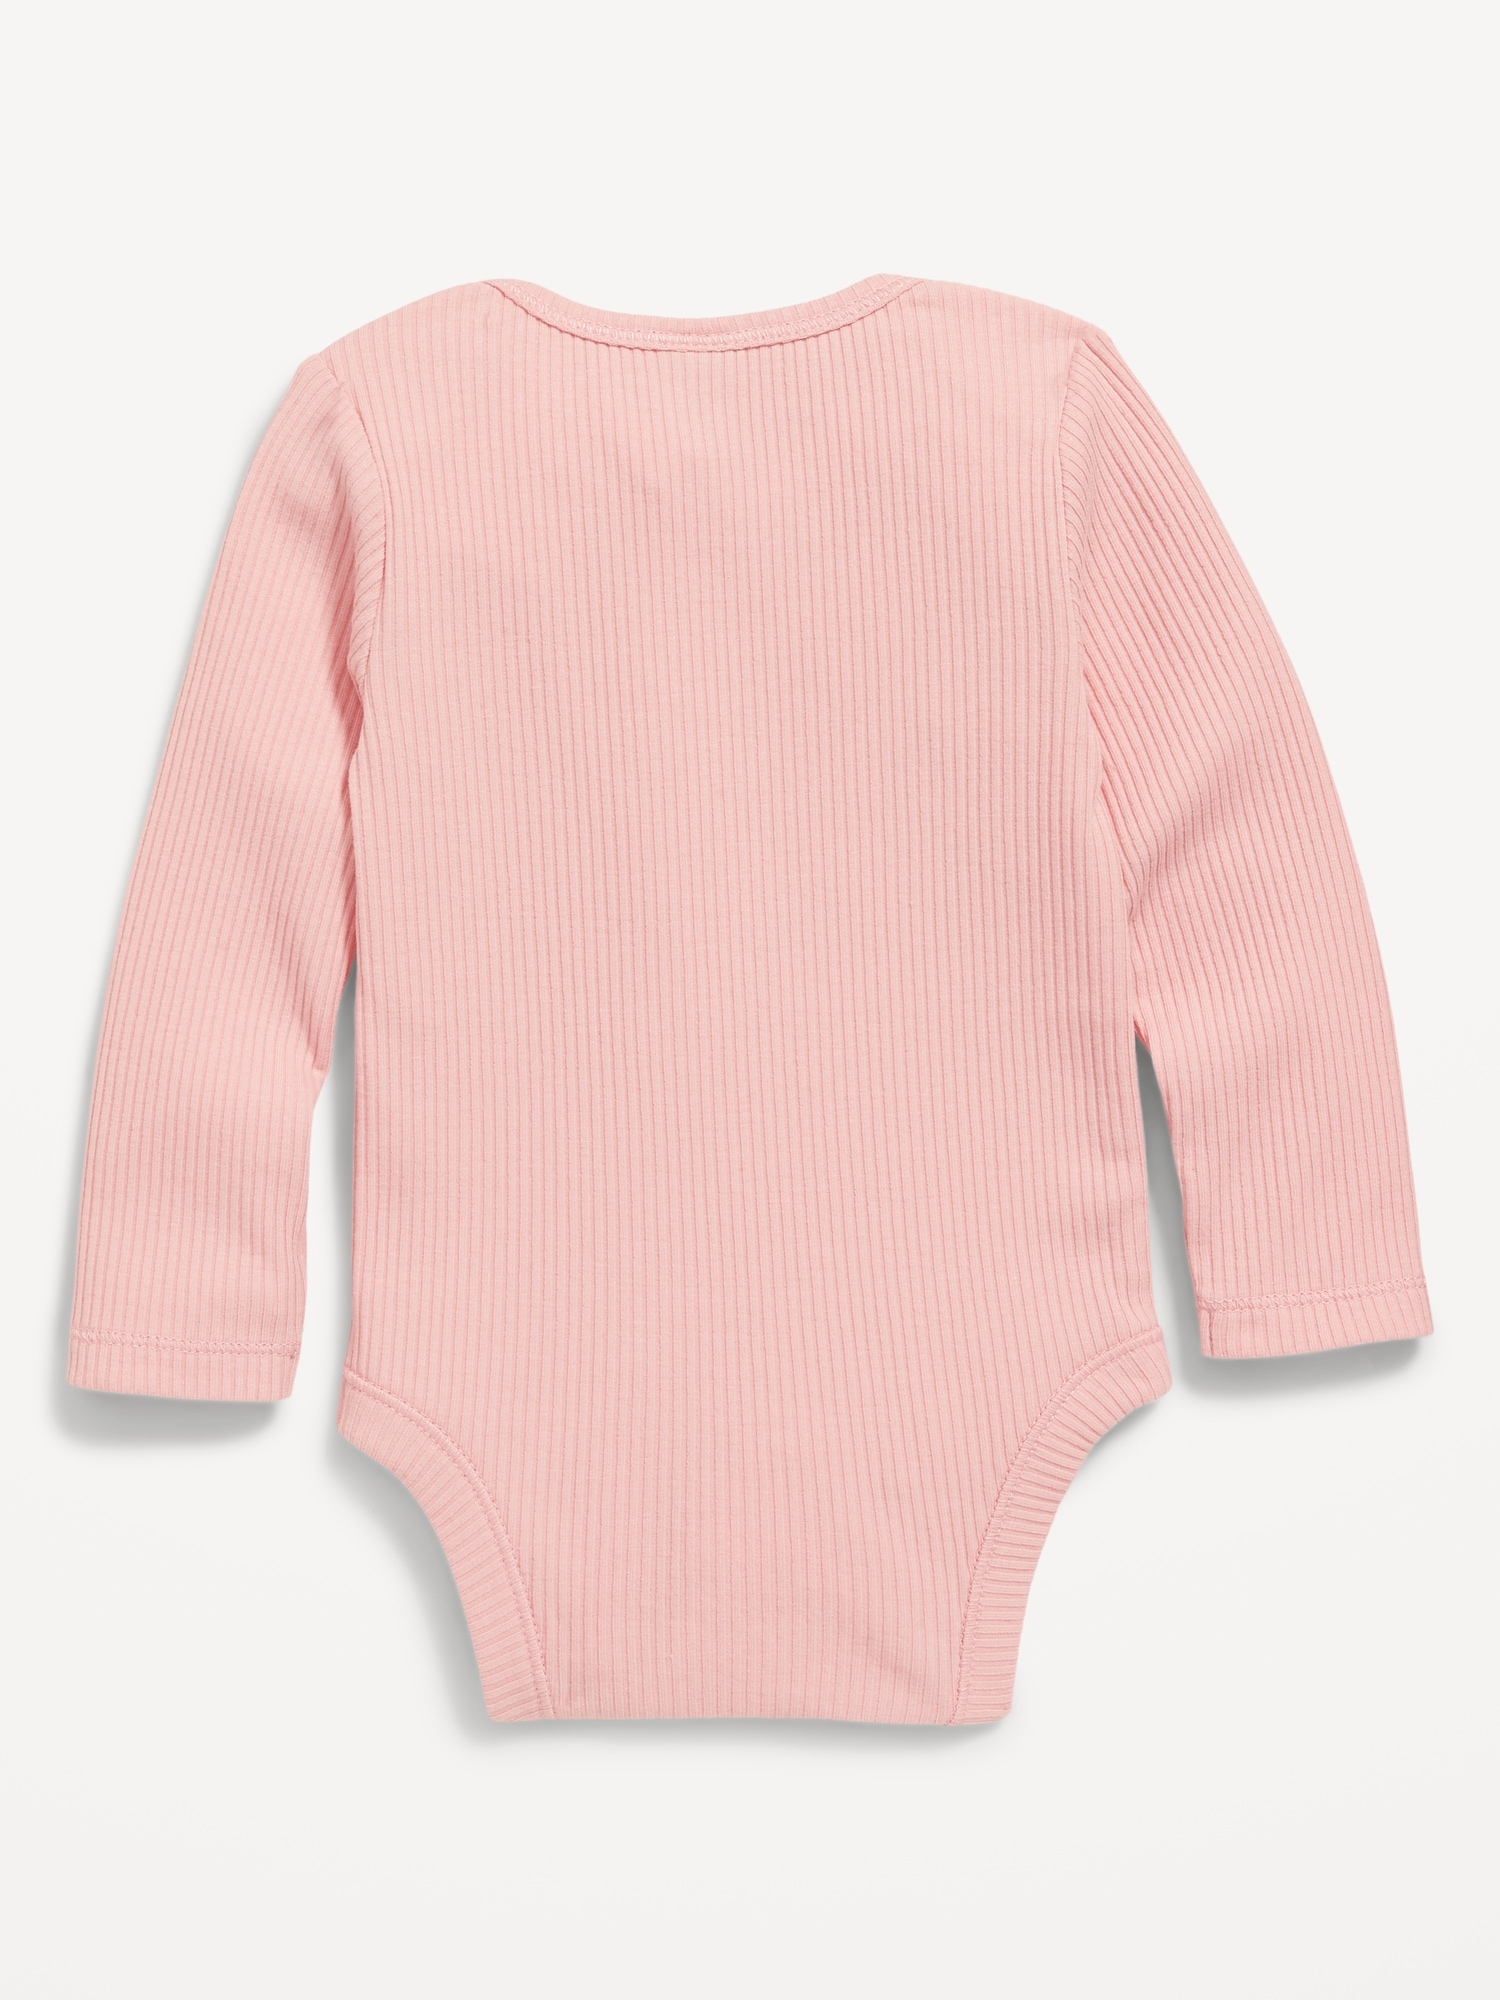 Fashion Baby Girls A/W Clothes Set Ribbed Long Sleeves Bodysuit